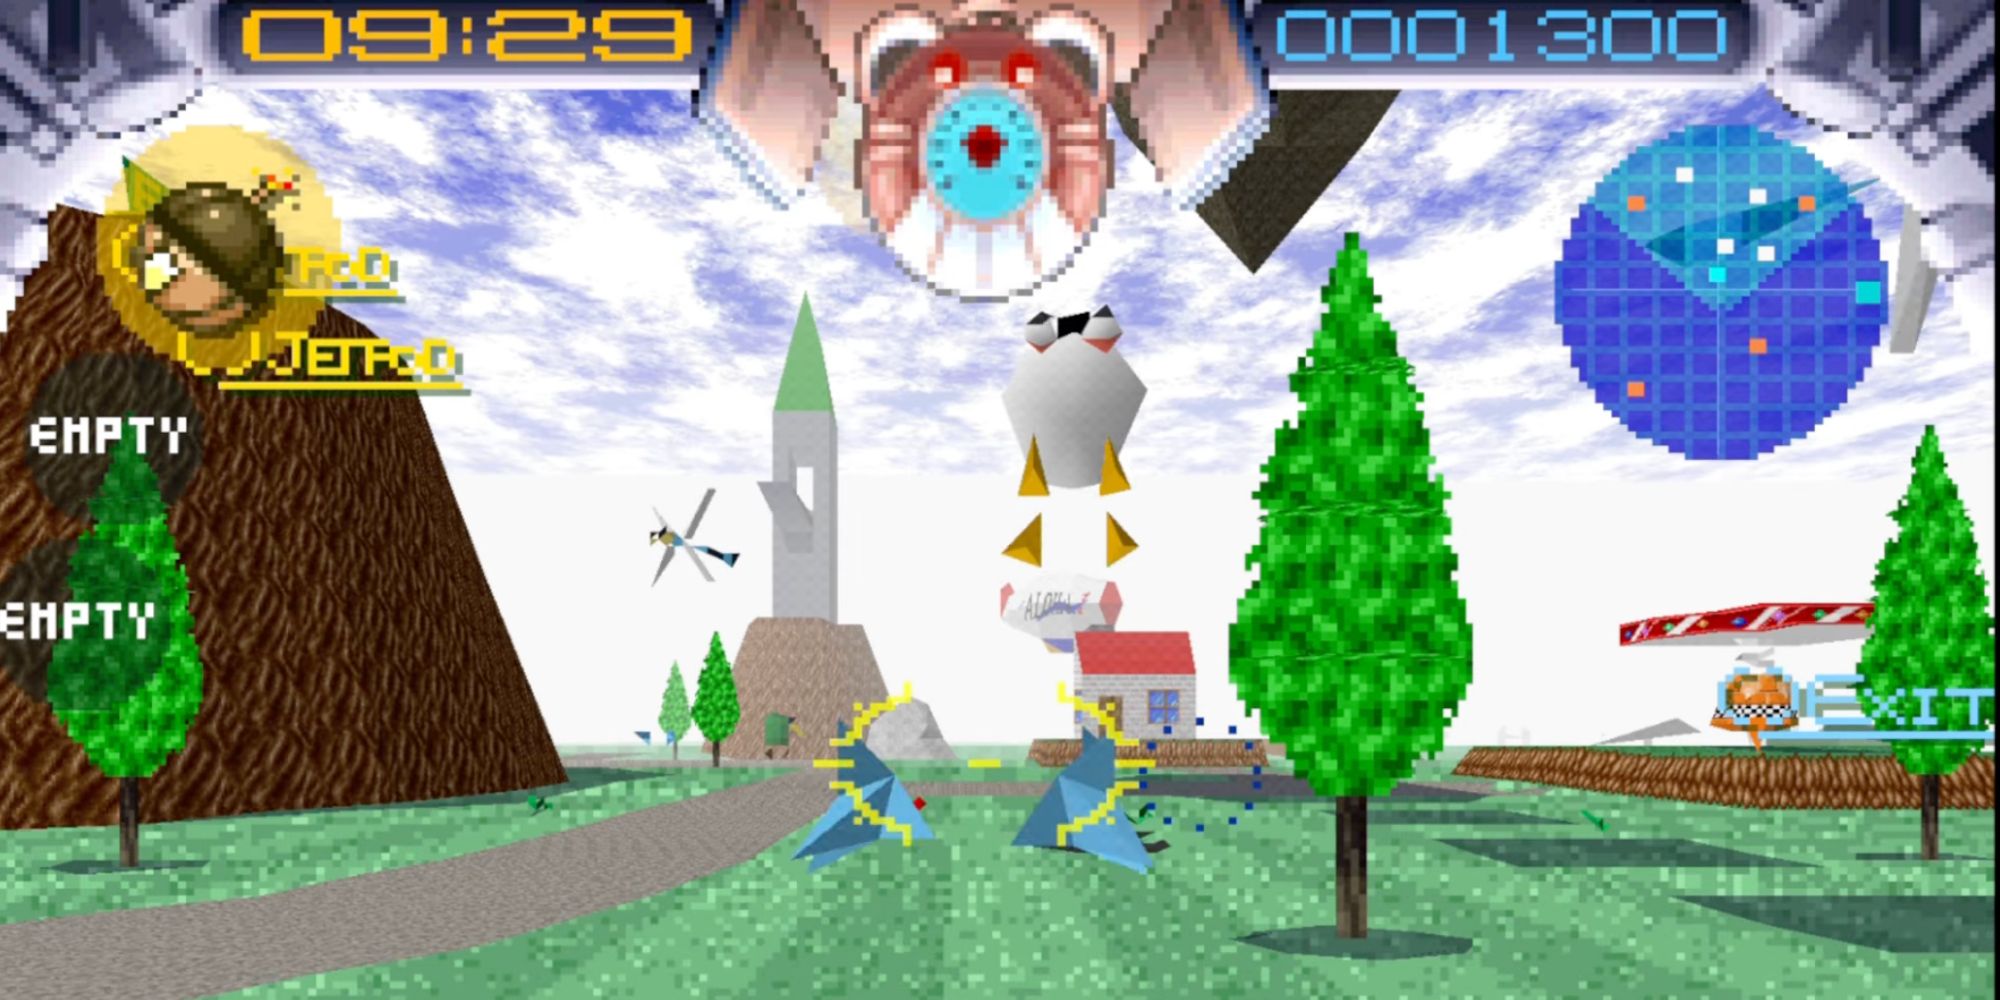 A screenshot of Jumping Flash, showing a strange creature menacing the player in a surreal environment